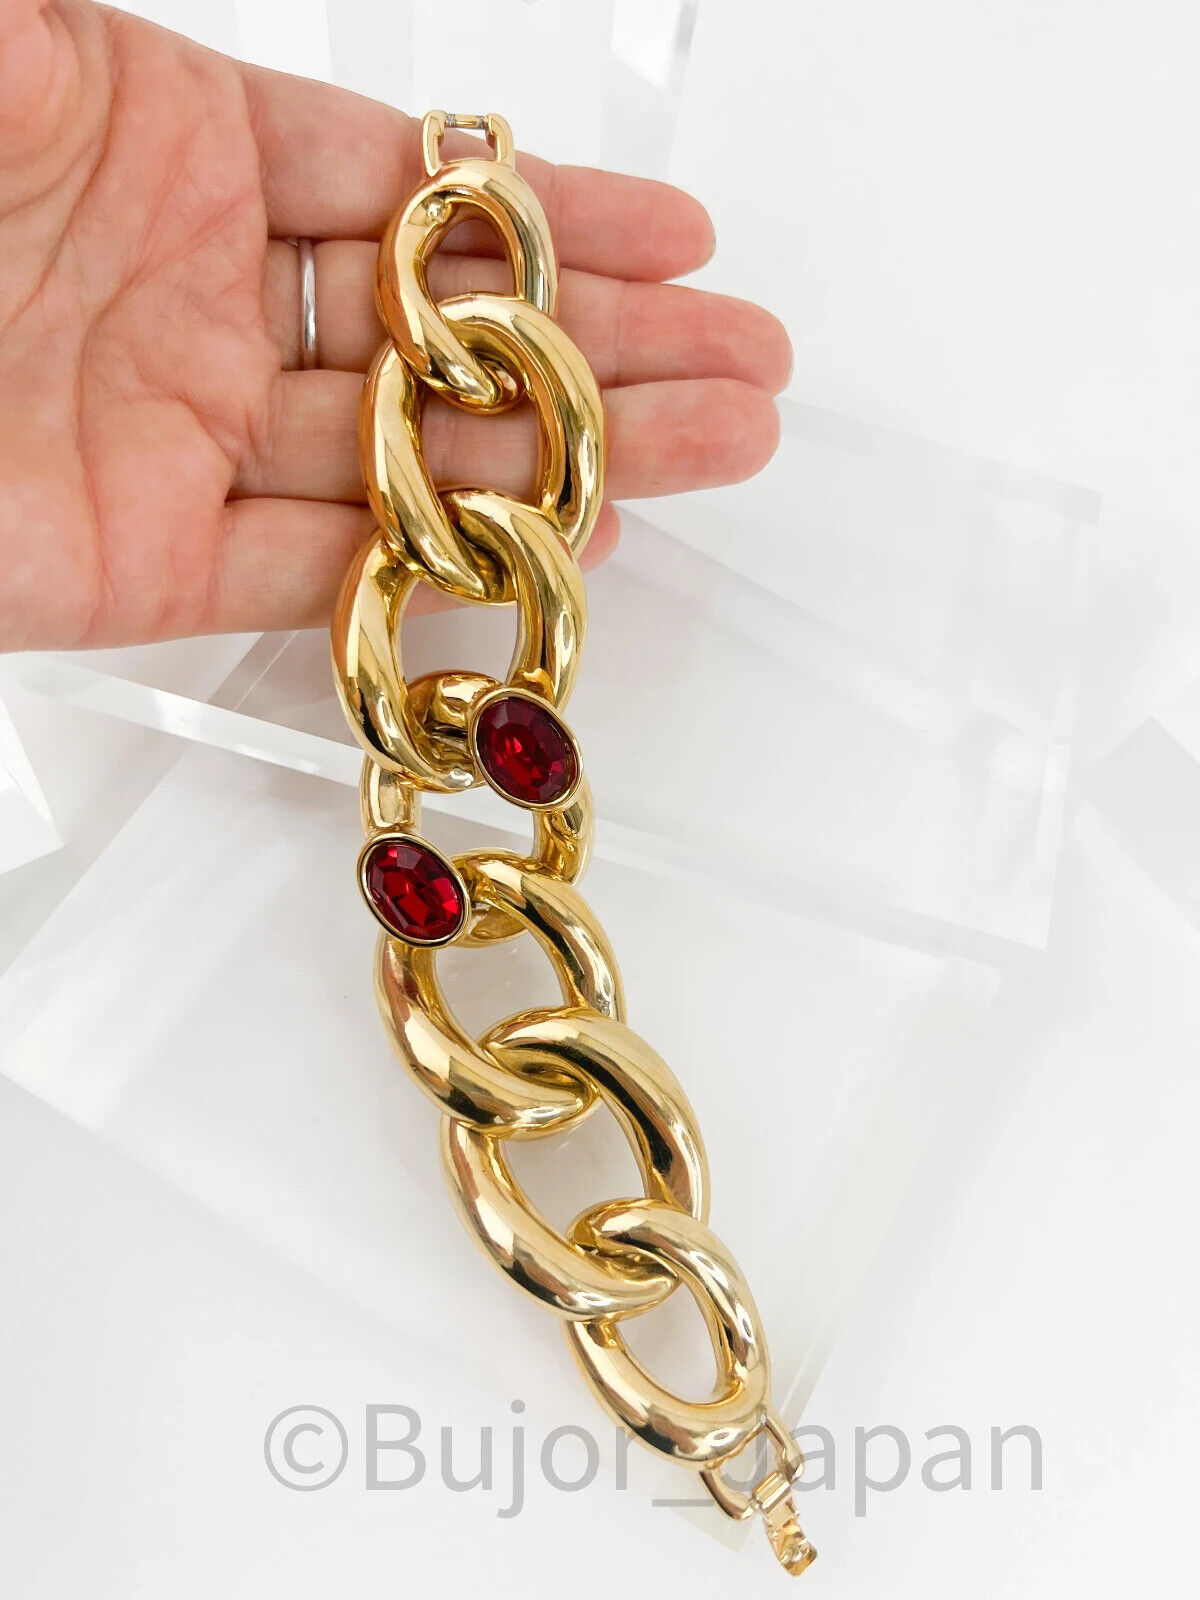 Vintage Givenchy Bracelet Givenchy  Chain Bracelet, Link Bracelet, Gold Tone Bracelet, Givenchy Vintage Jewelry, Gift for her